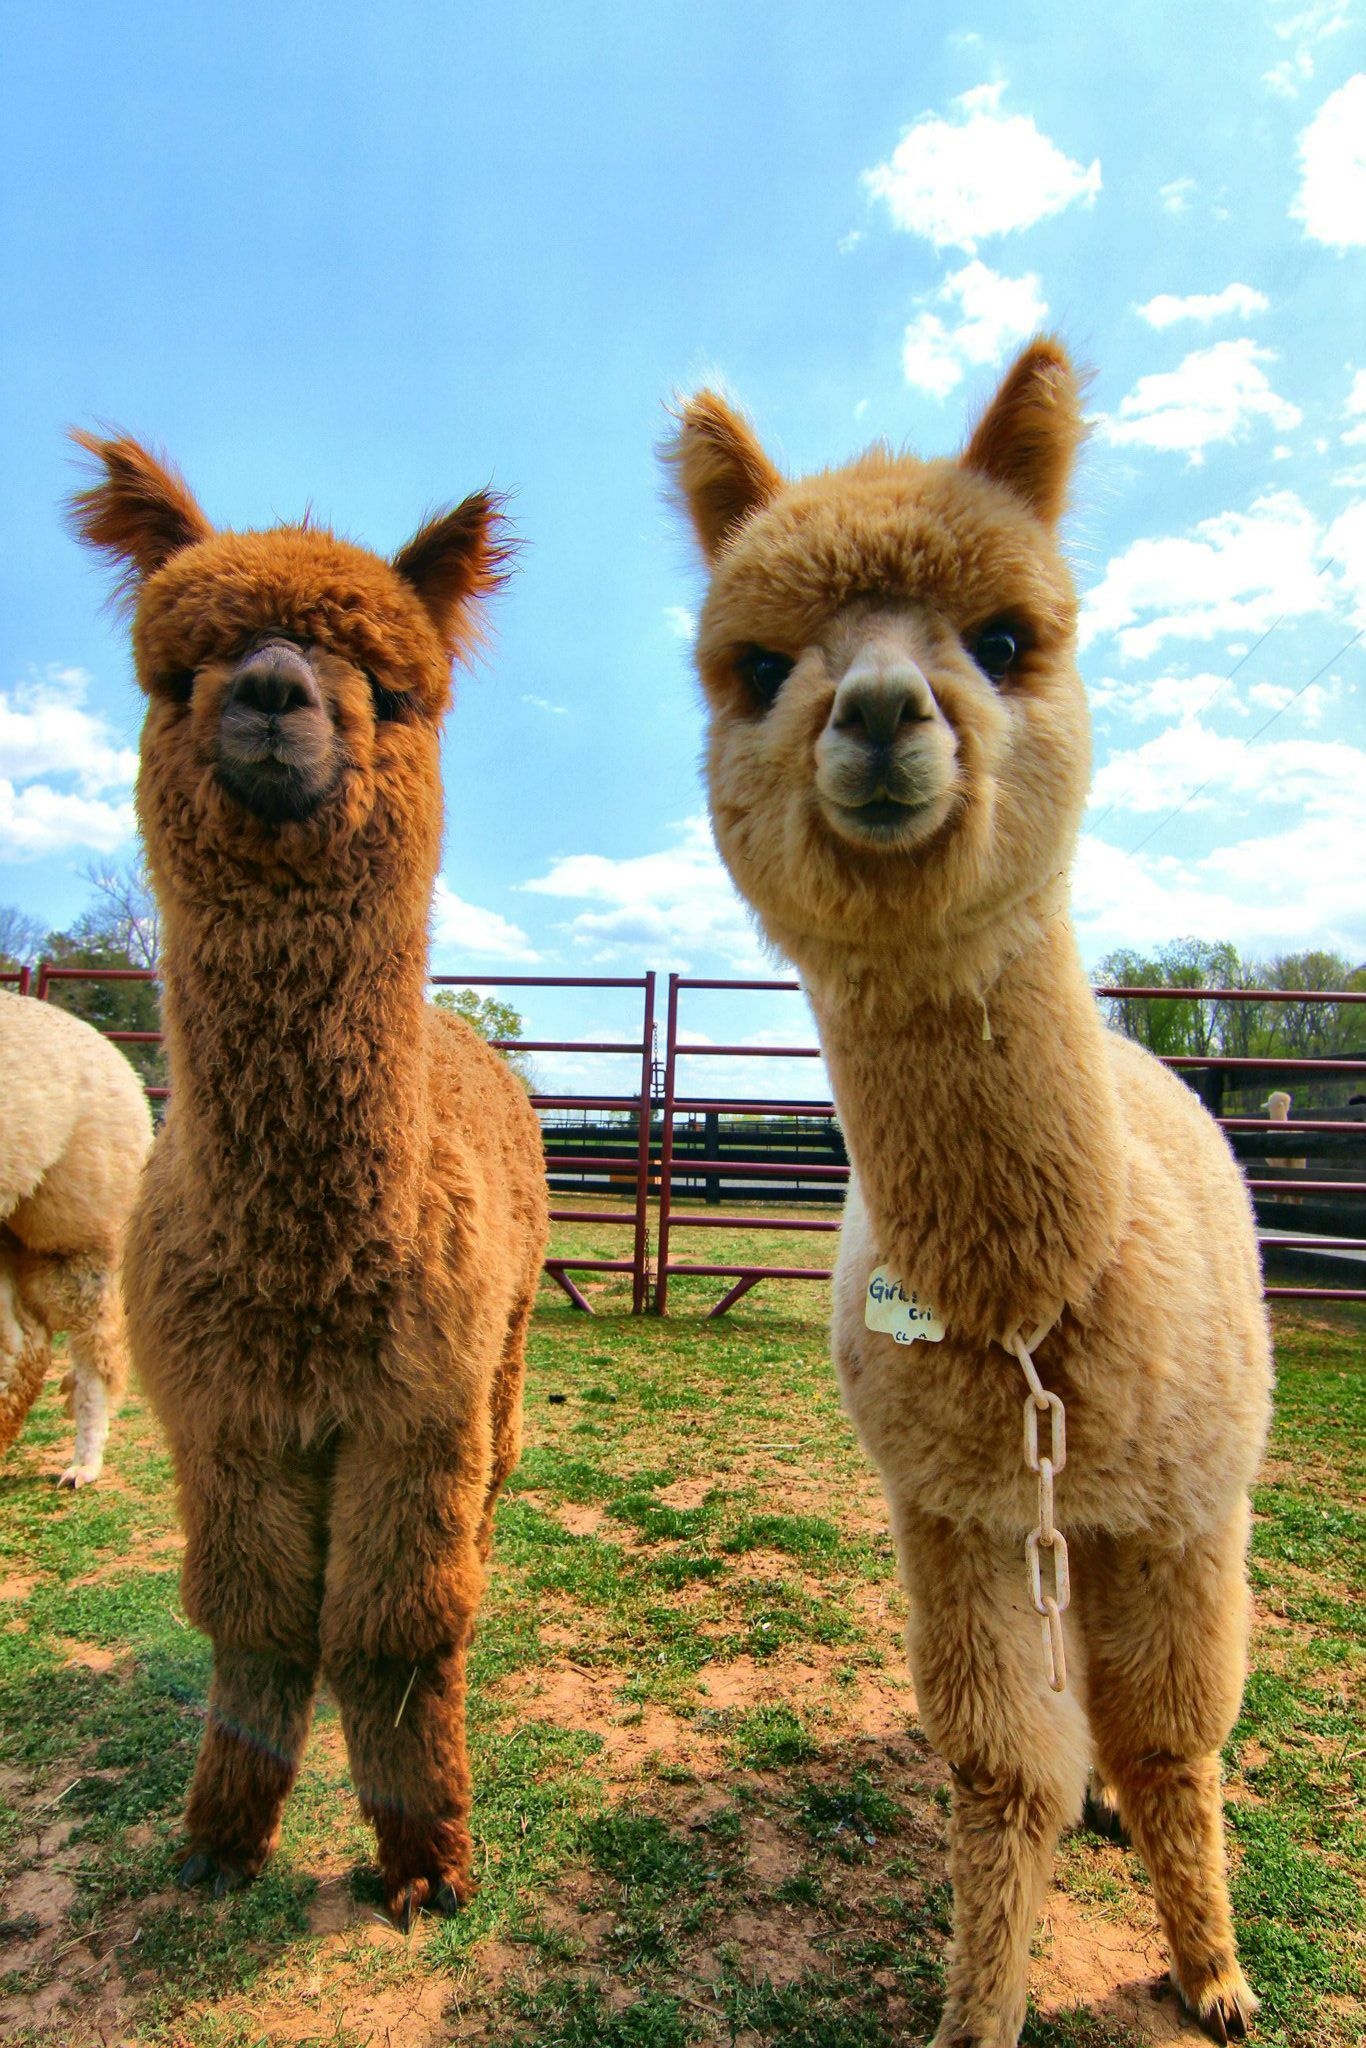 Adorable alpaca family, Baby animals at their cutest, My family's alpaca love, Beautiful creatures, 1370x2050 HD Phone